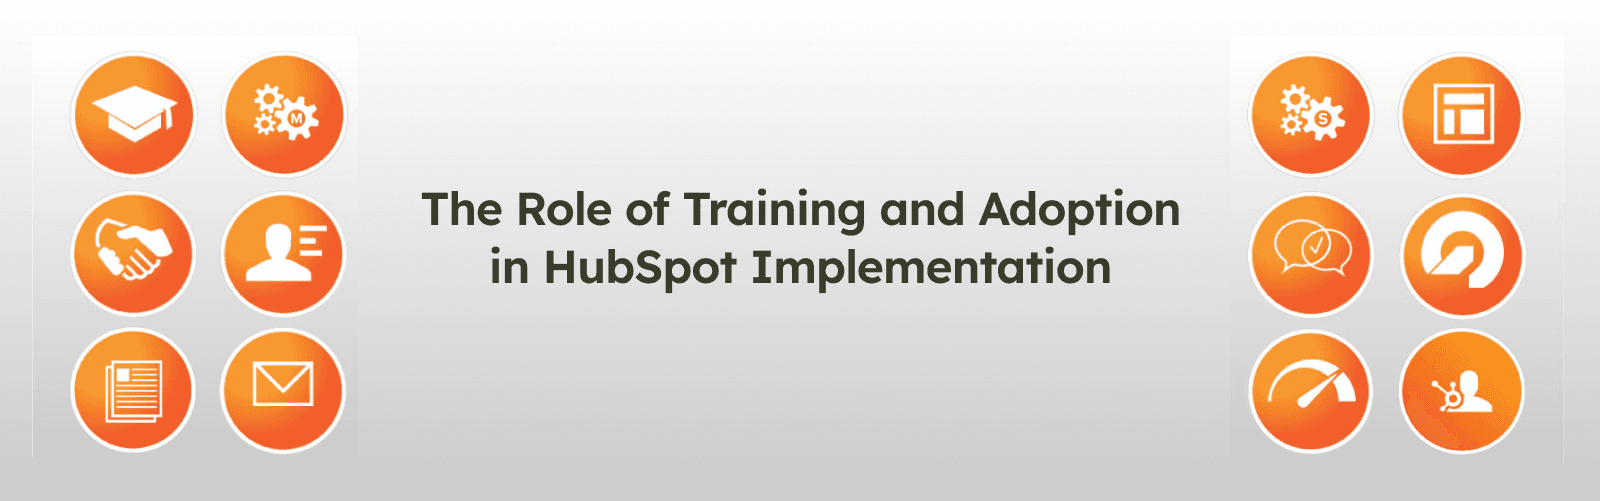 The Role of Training and Adoption in HubSpot Implementation